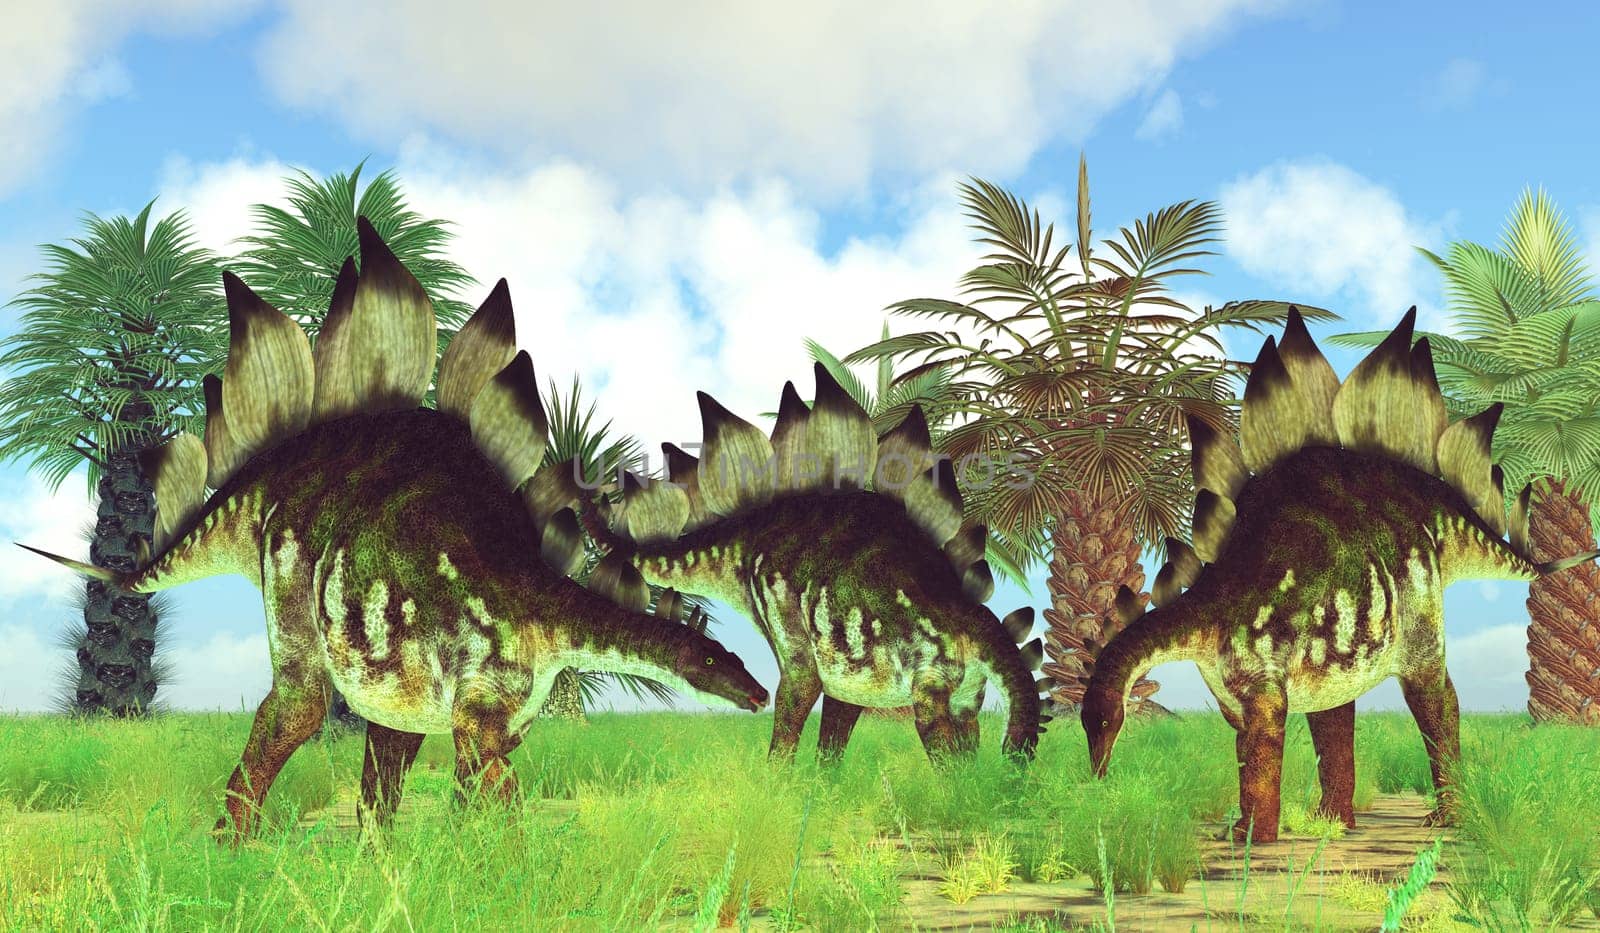 Stegosaurus was an armored herbivorous dinosaur that lived in North America during the Jurassic Period.